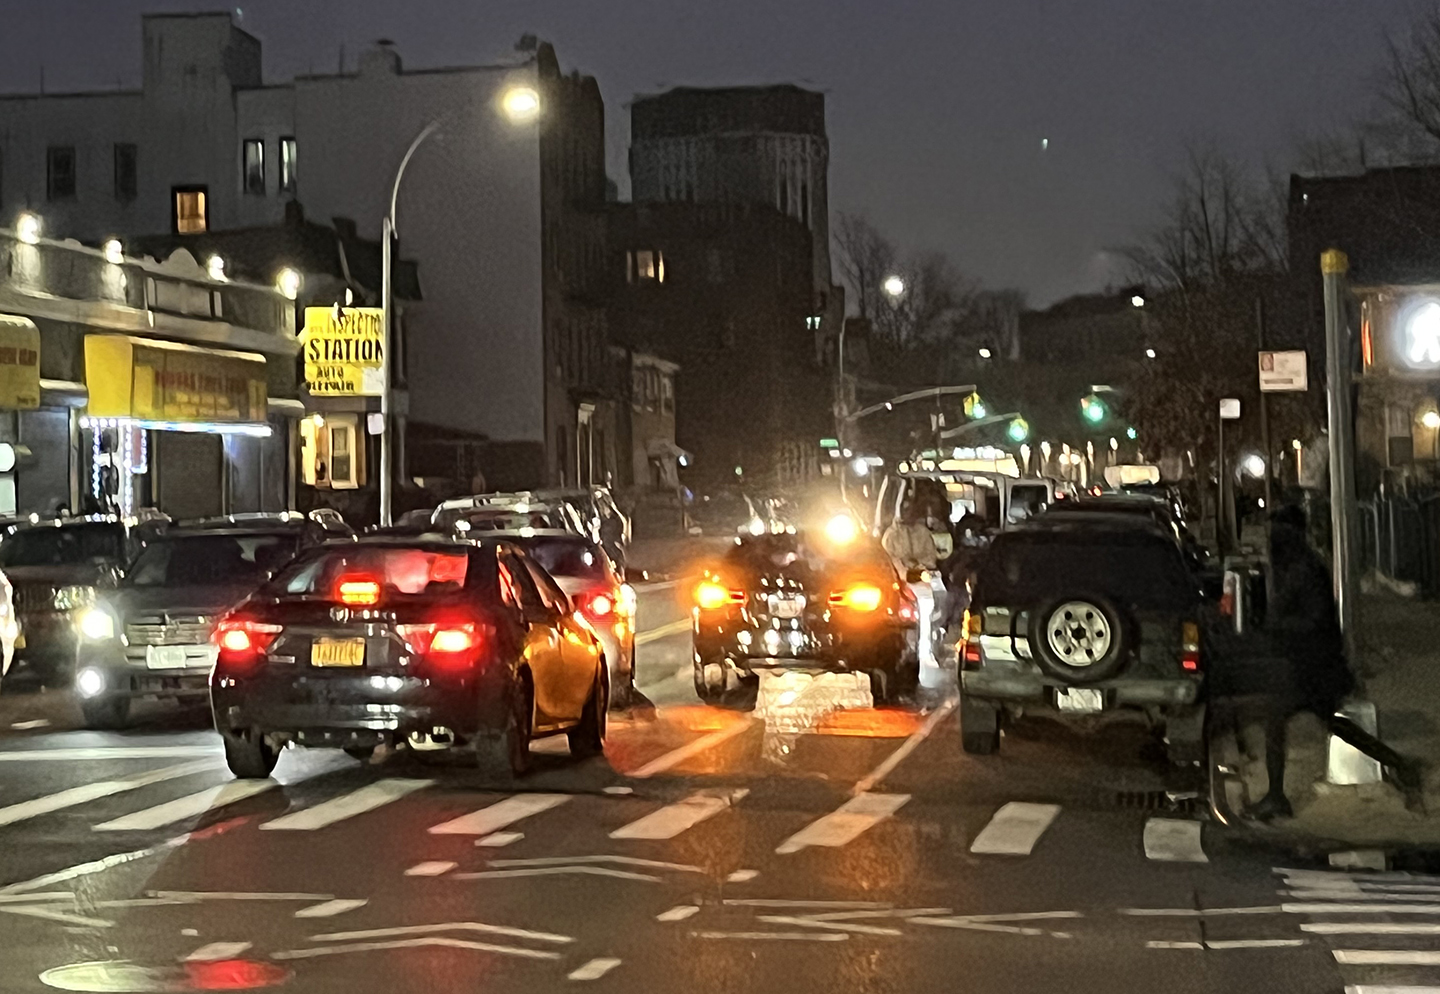 A busy street at night with a painted bike lane between the traffic lane and curbside parking. The bike lane is blocked by double parked cars and trucks.